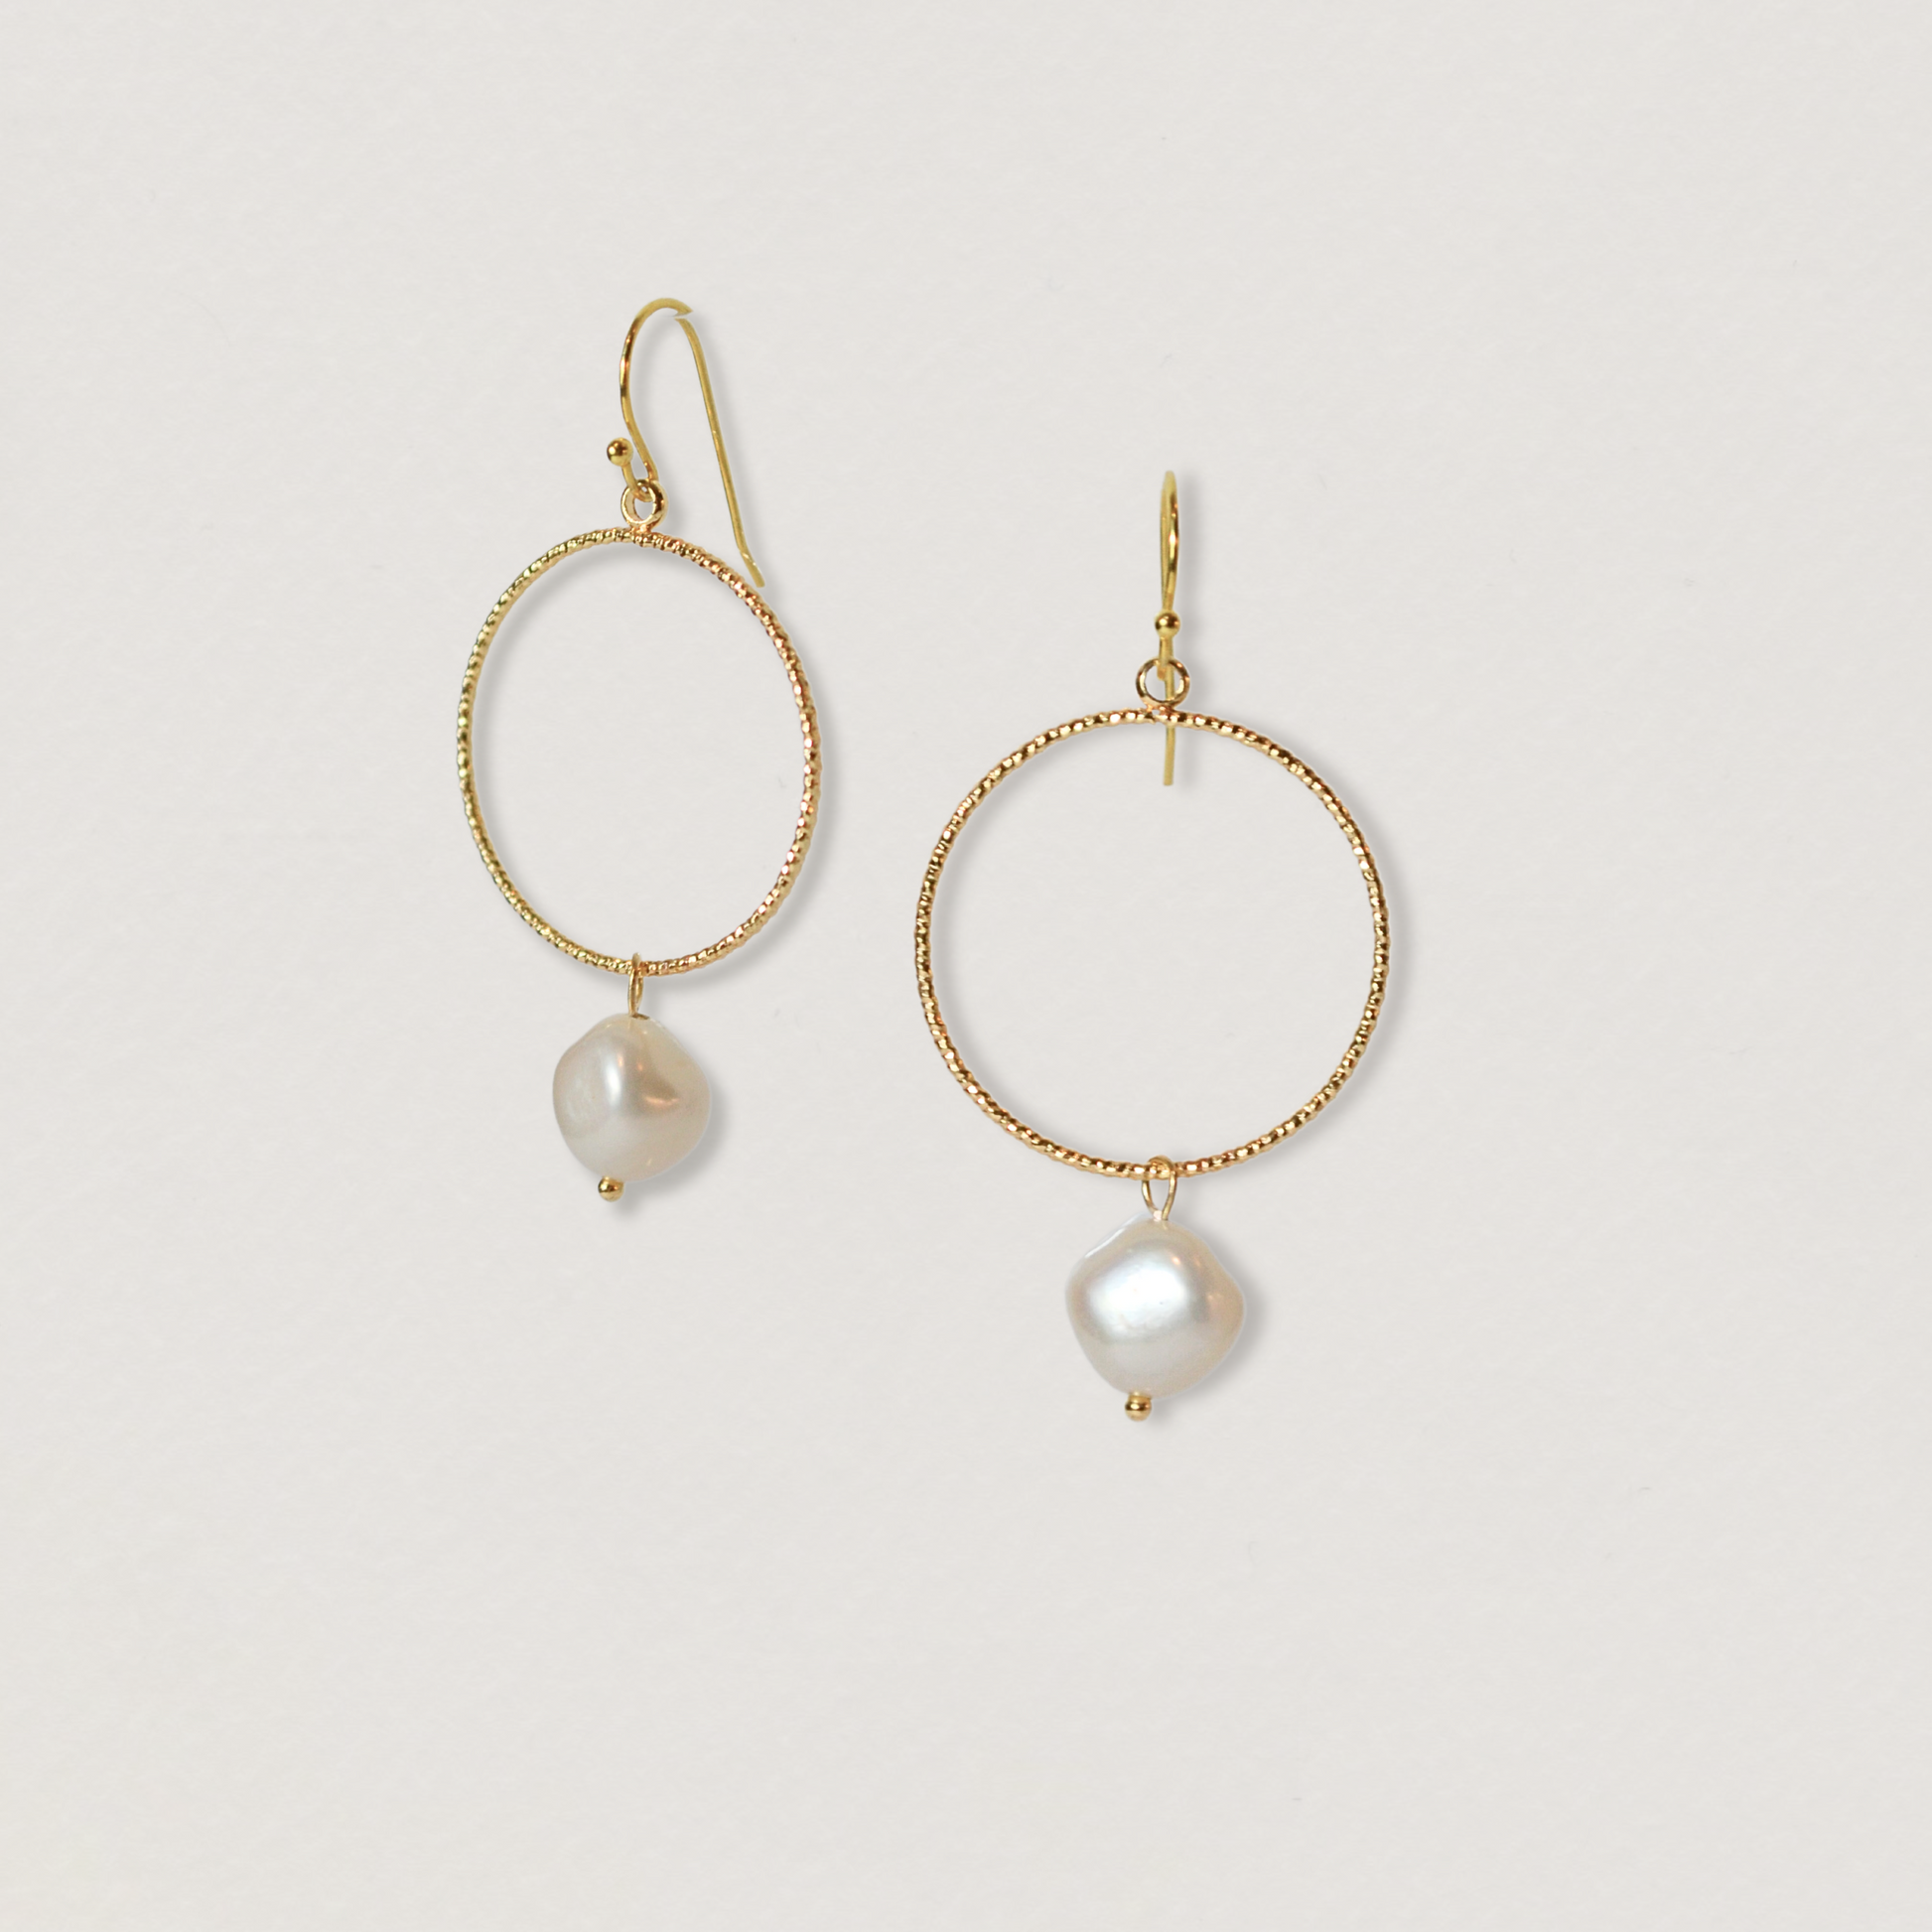 Gold pearl drop earrings with pearl